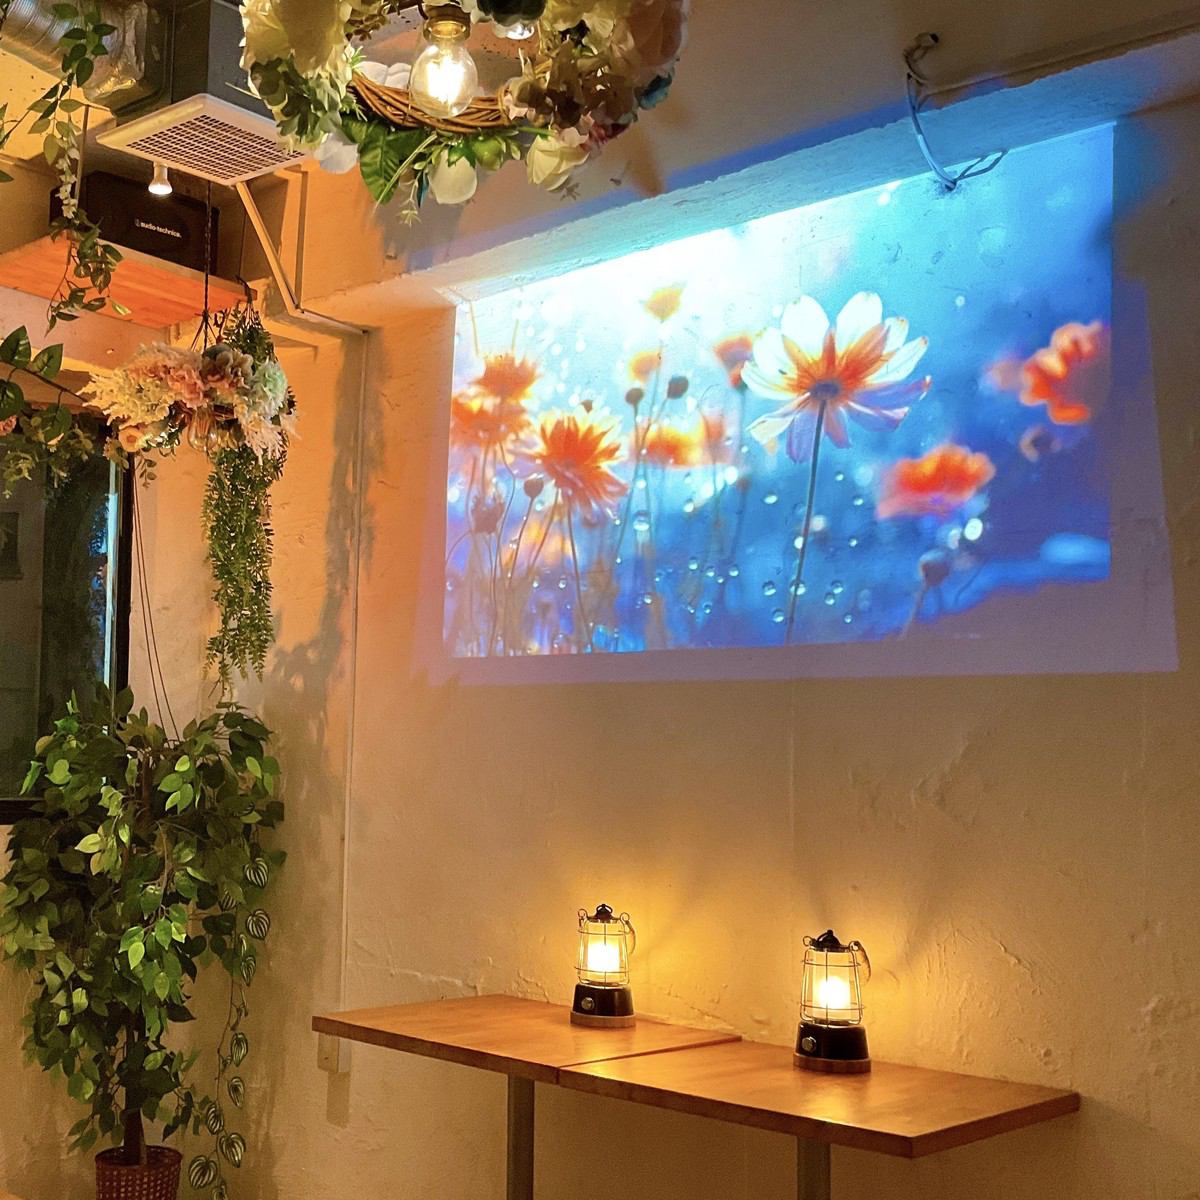 The large projector is sure to liven up your private party! You can also use microphones and audio equipment as much as you like, and there are many other nice private benefits ☆ If you are considering a private party in Shibuya, please feel free to contact us.